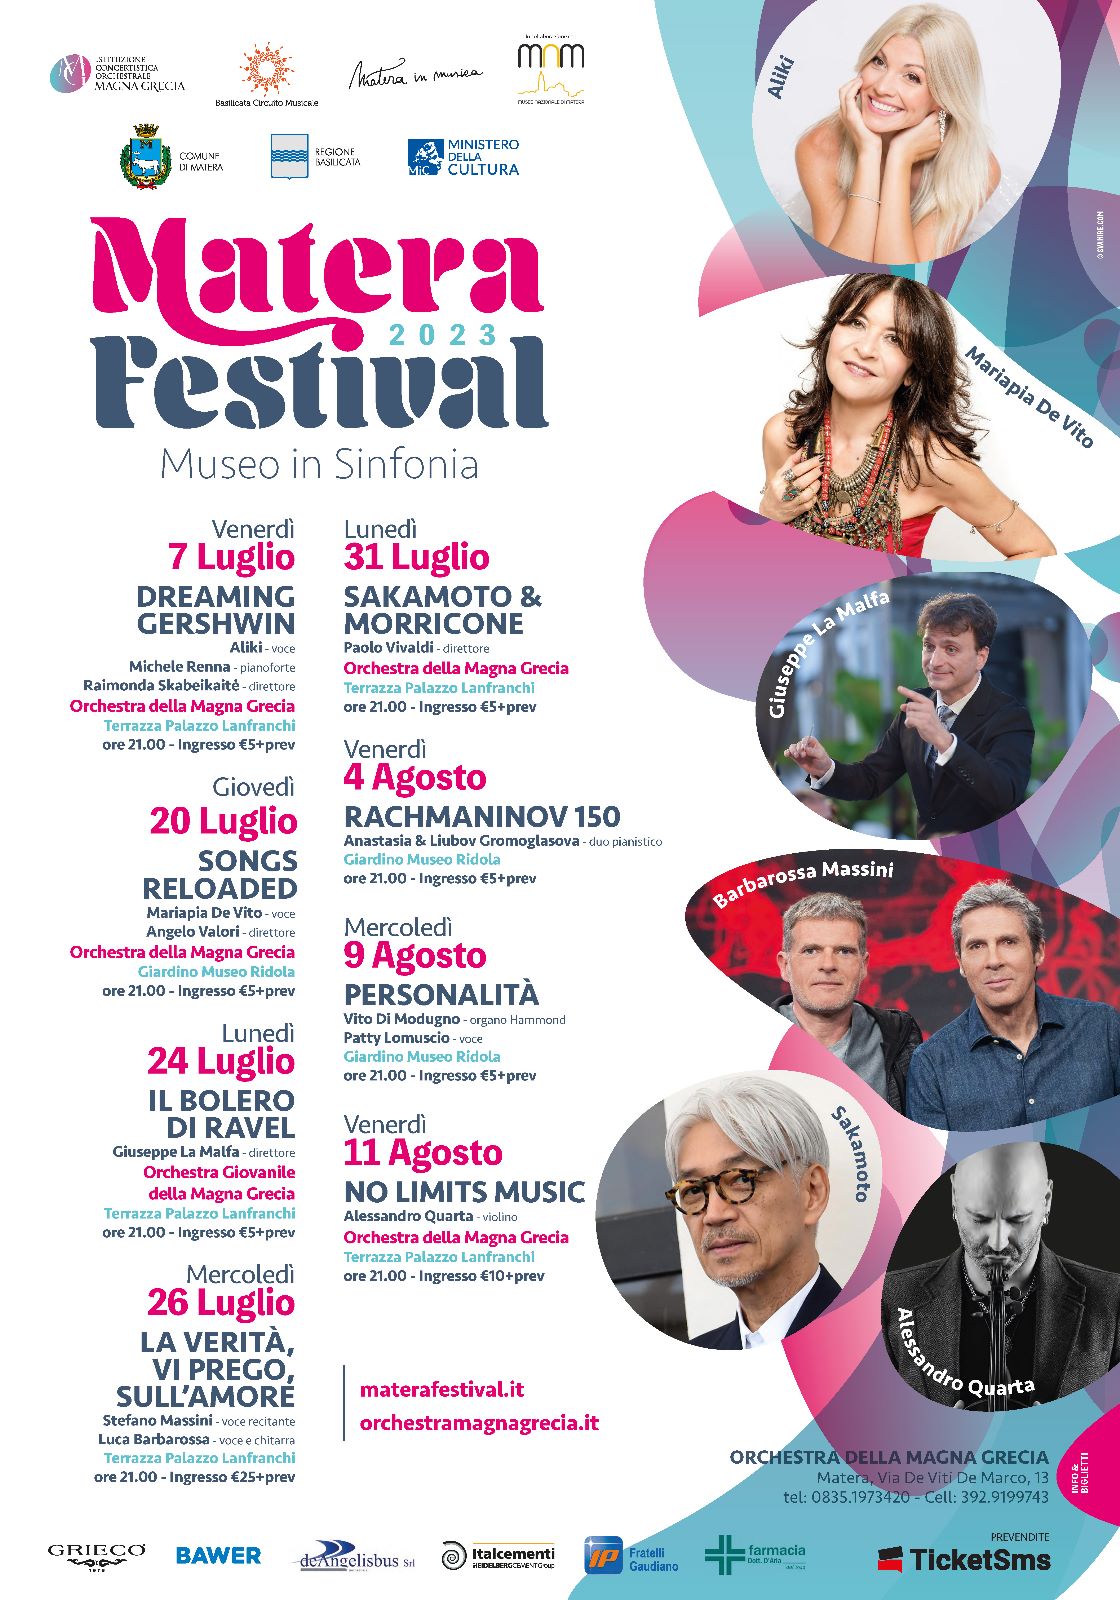 Matera Festival 2023 - Museo in Sinfonia